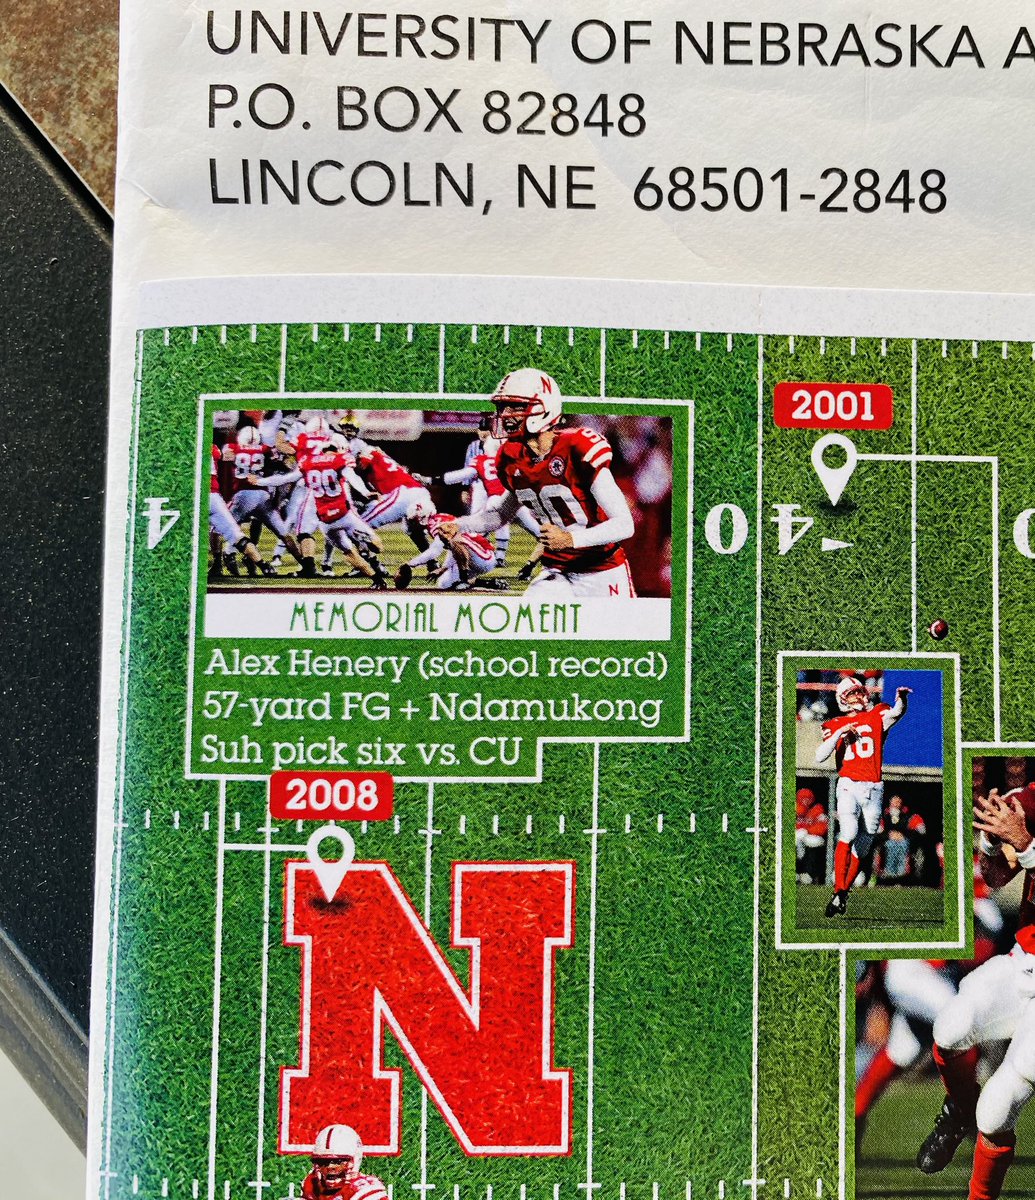 Our football tickets arrived in the mail today. Go Huskers! And for those who are wondering : 1. Yes, I still get paper tickets. 2. Yes, I have totally drank the Rhule-aid. Go Big Red! #Huskers #GoBigRed @HuskerFBNation